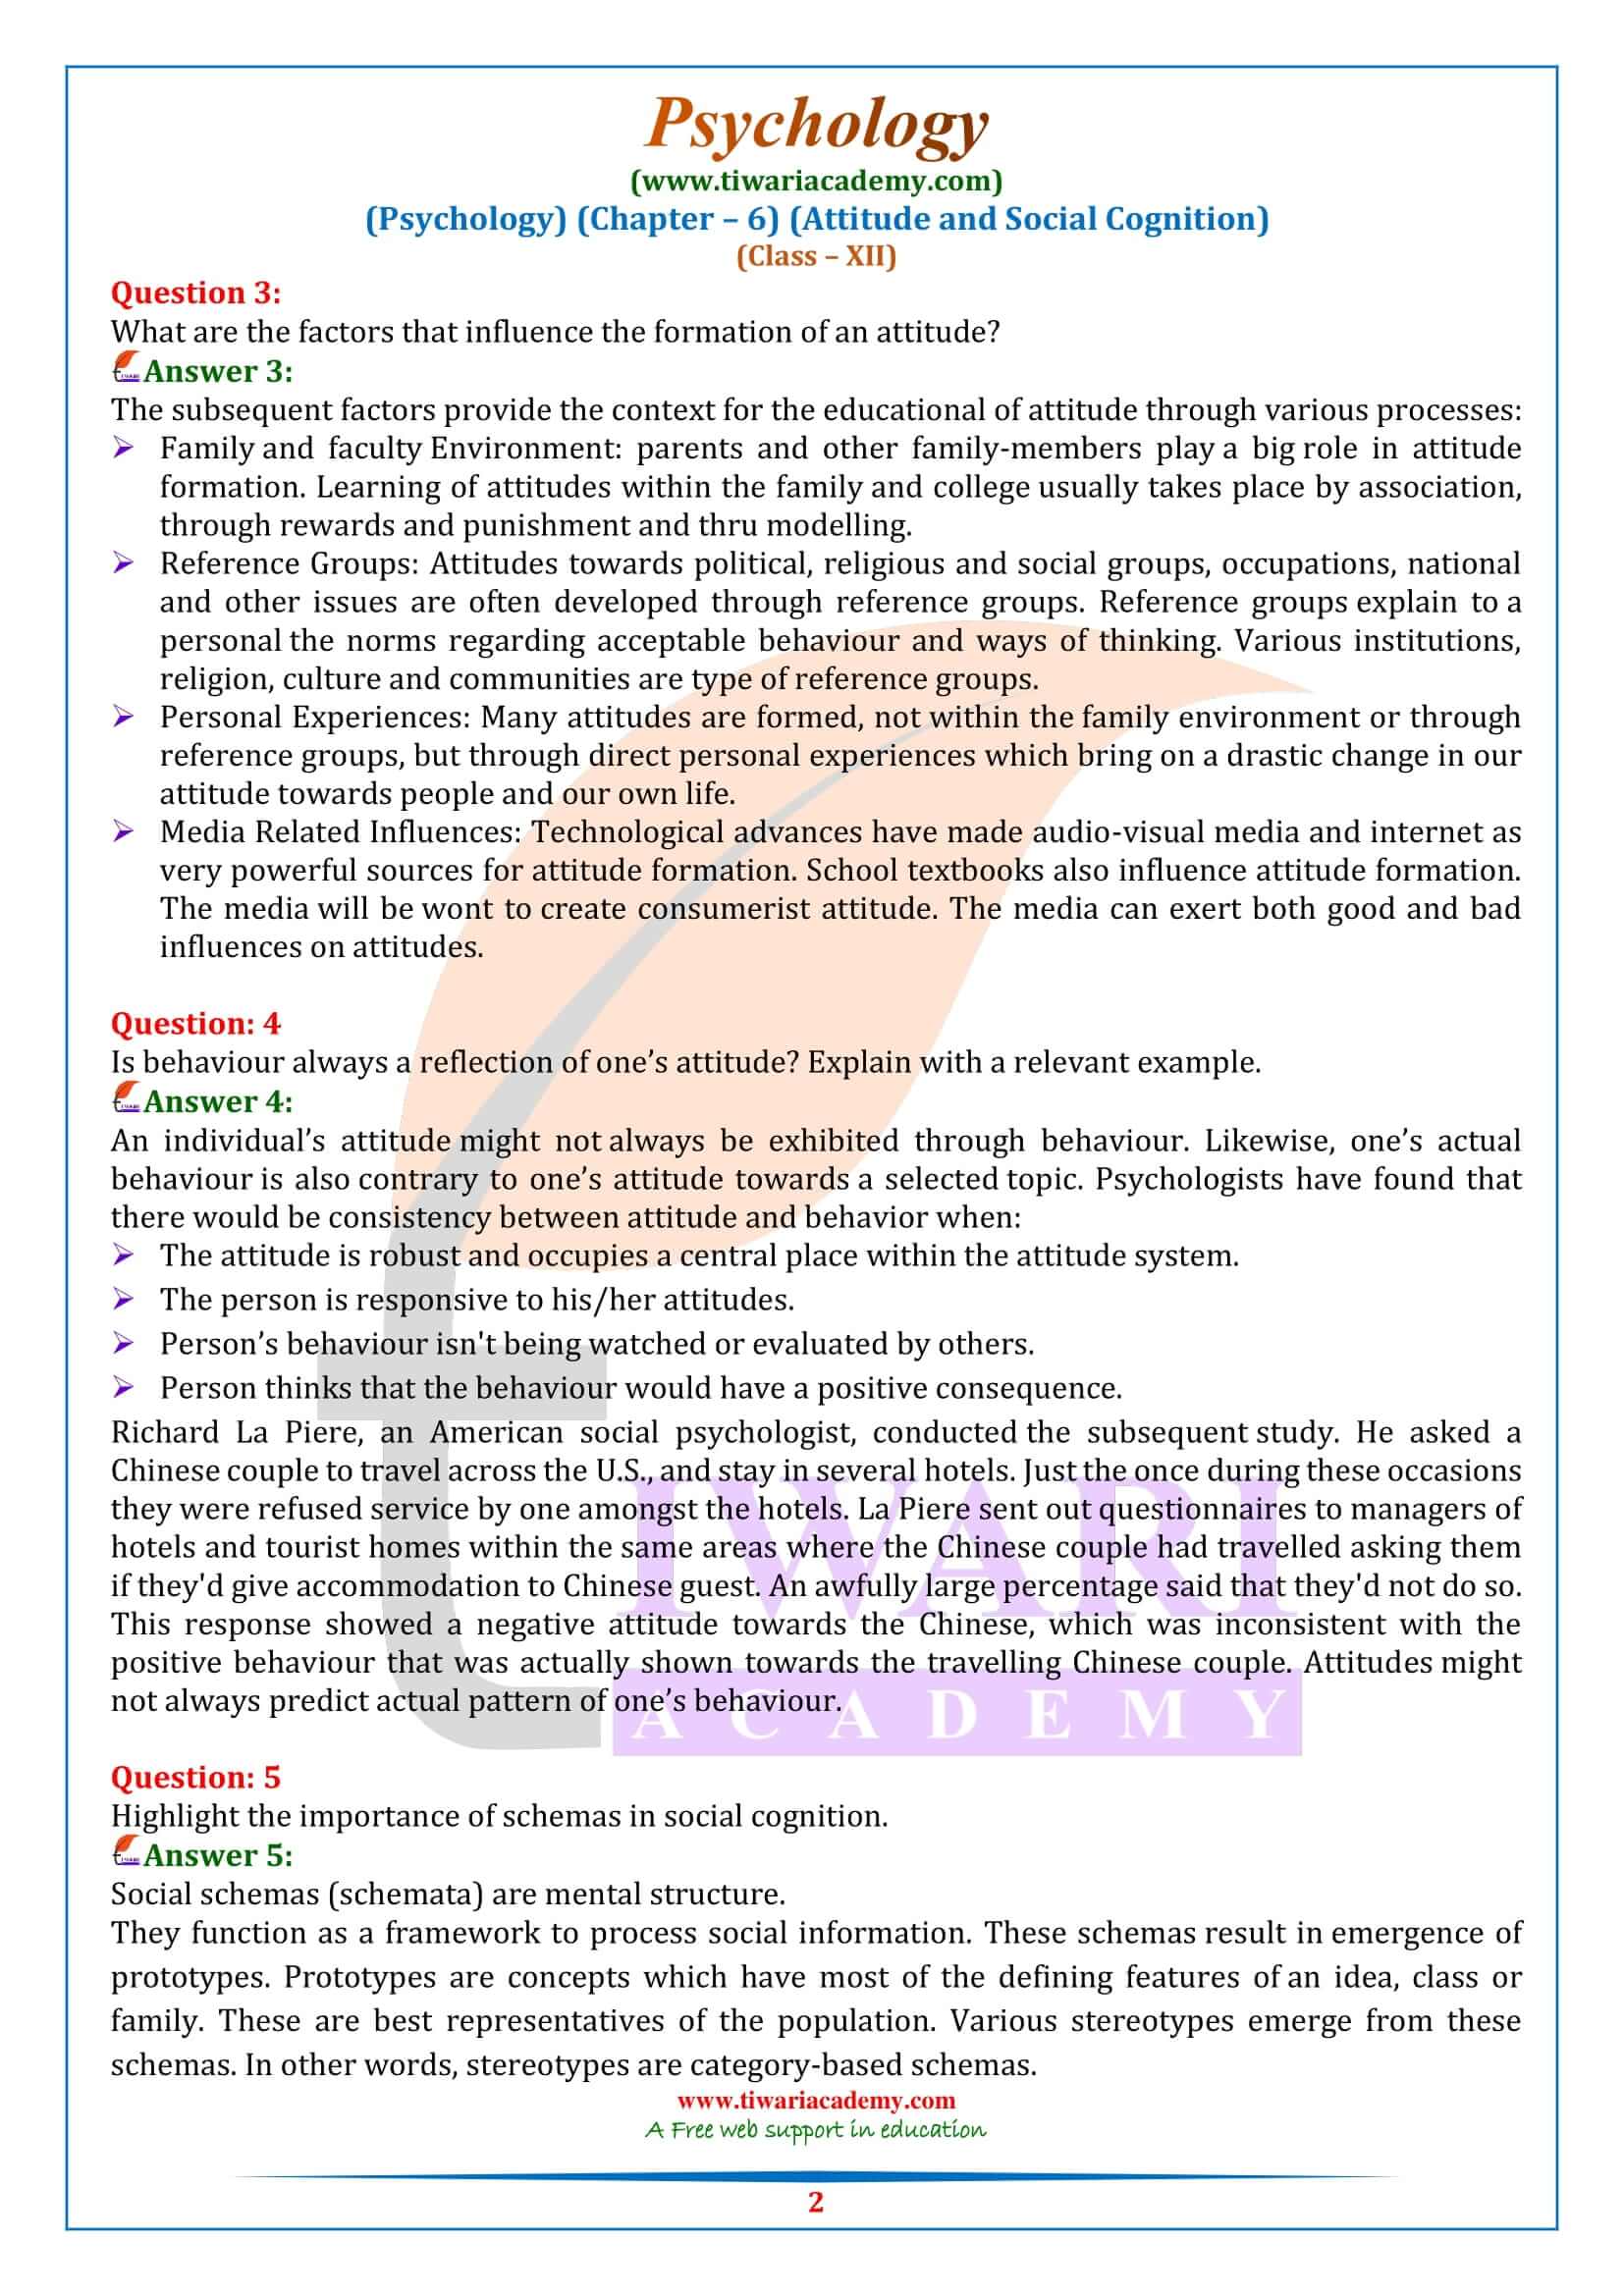 NCERT Solutions for Class 12 Psychology Chapter 6